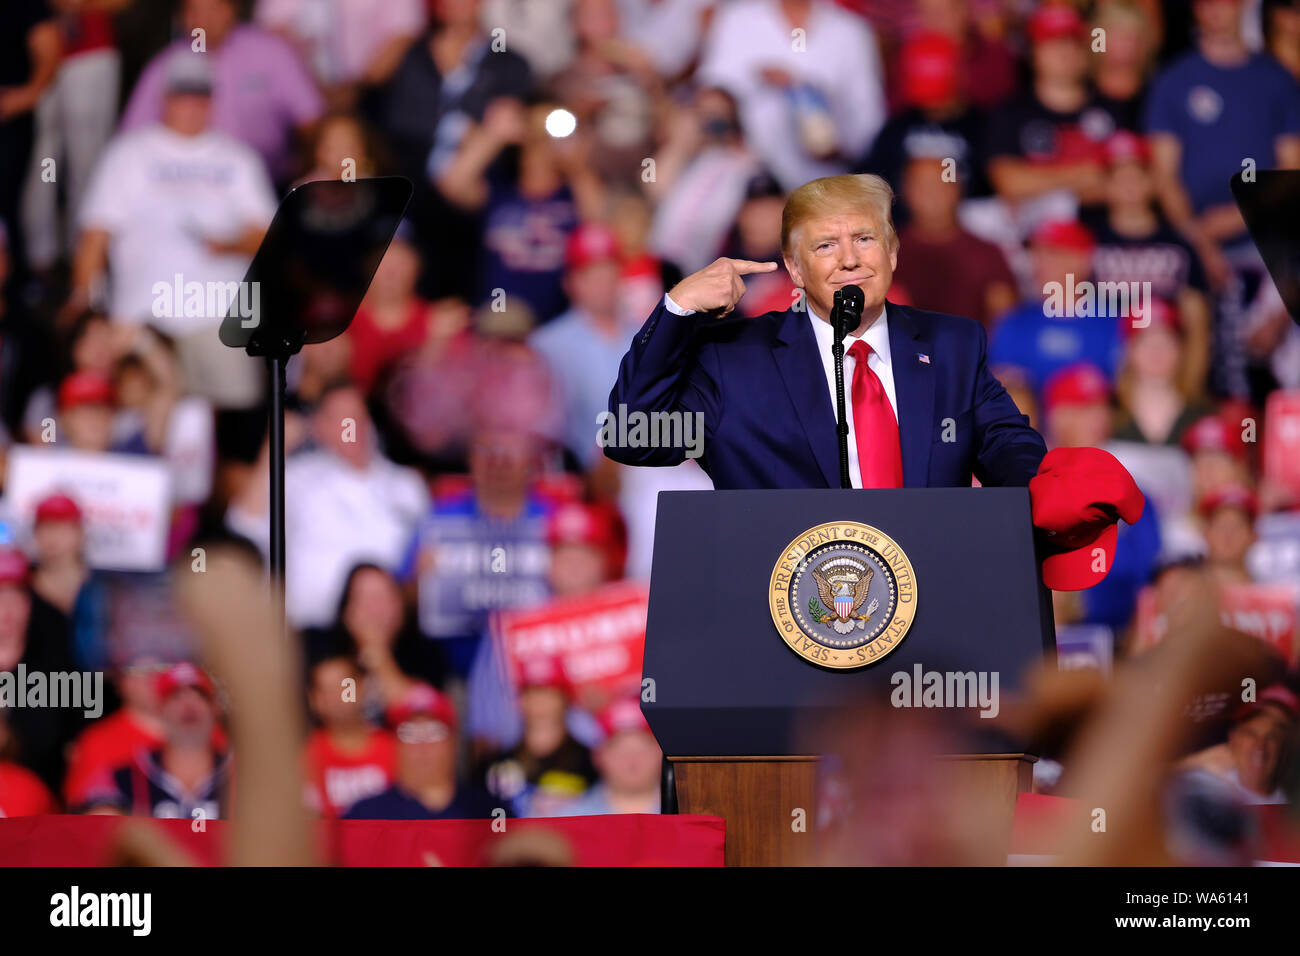 President Donald J. Trump speaks during his campaign for the election next year in Manchester.The current US president is travelling around the country to host rallies for his supports and preparations for the 2020 US presidential election. Stock Photo